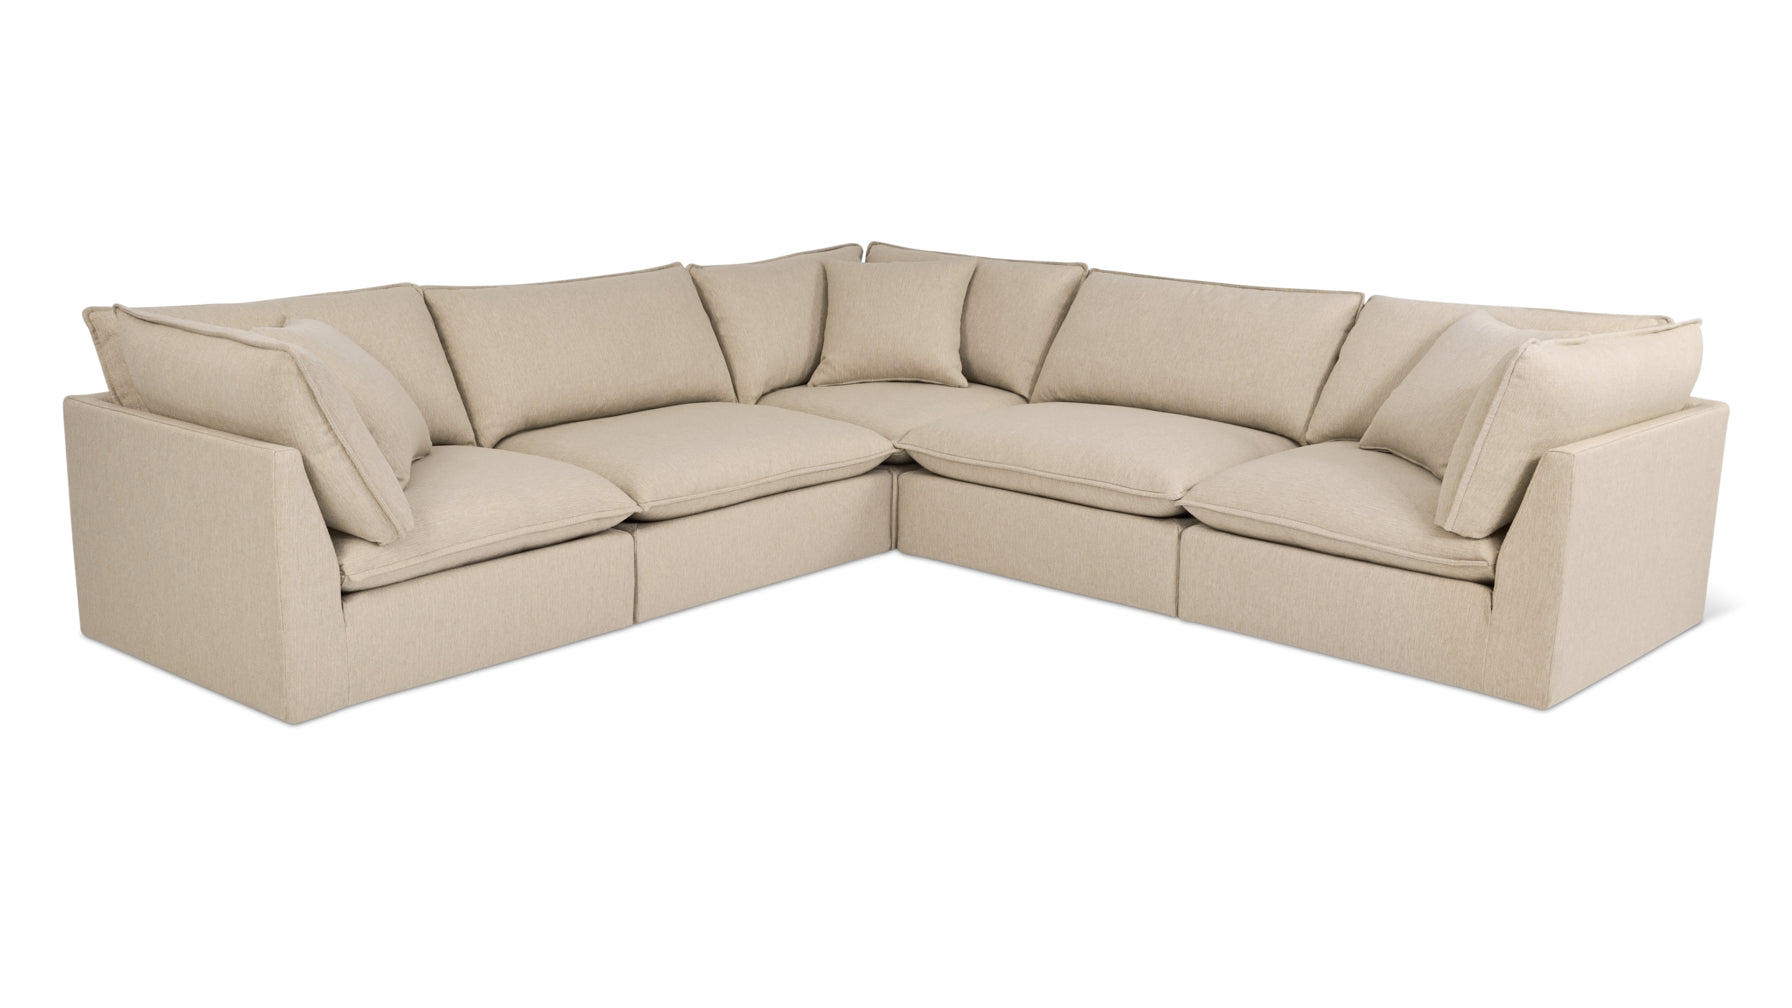 Chill Time 5-Piece Modular Sectional Closed, Biscuit - Image 2